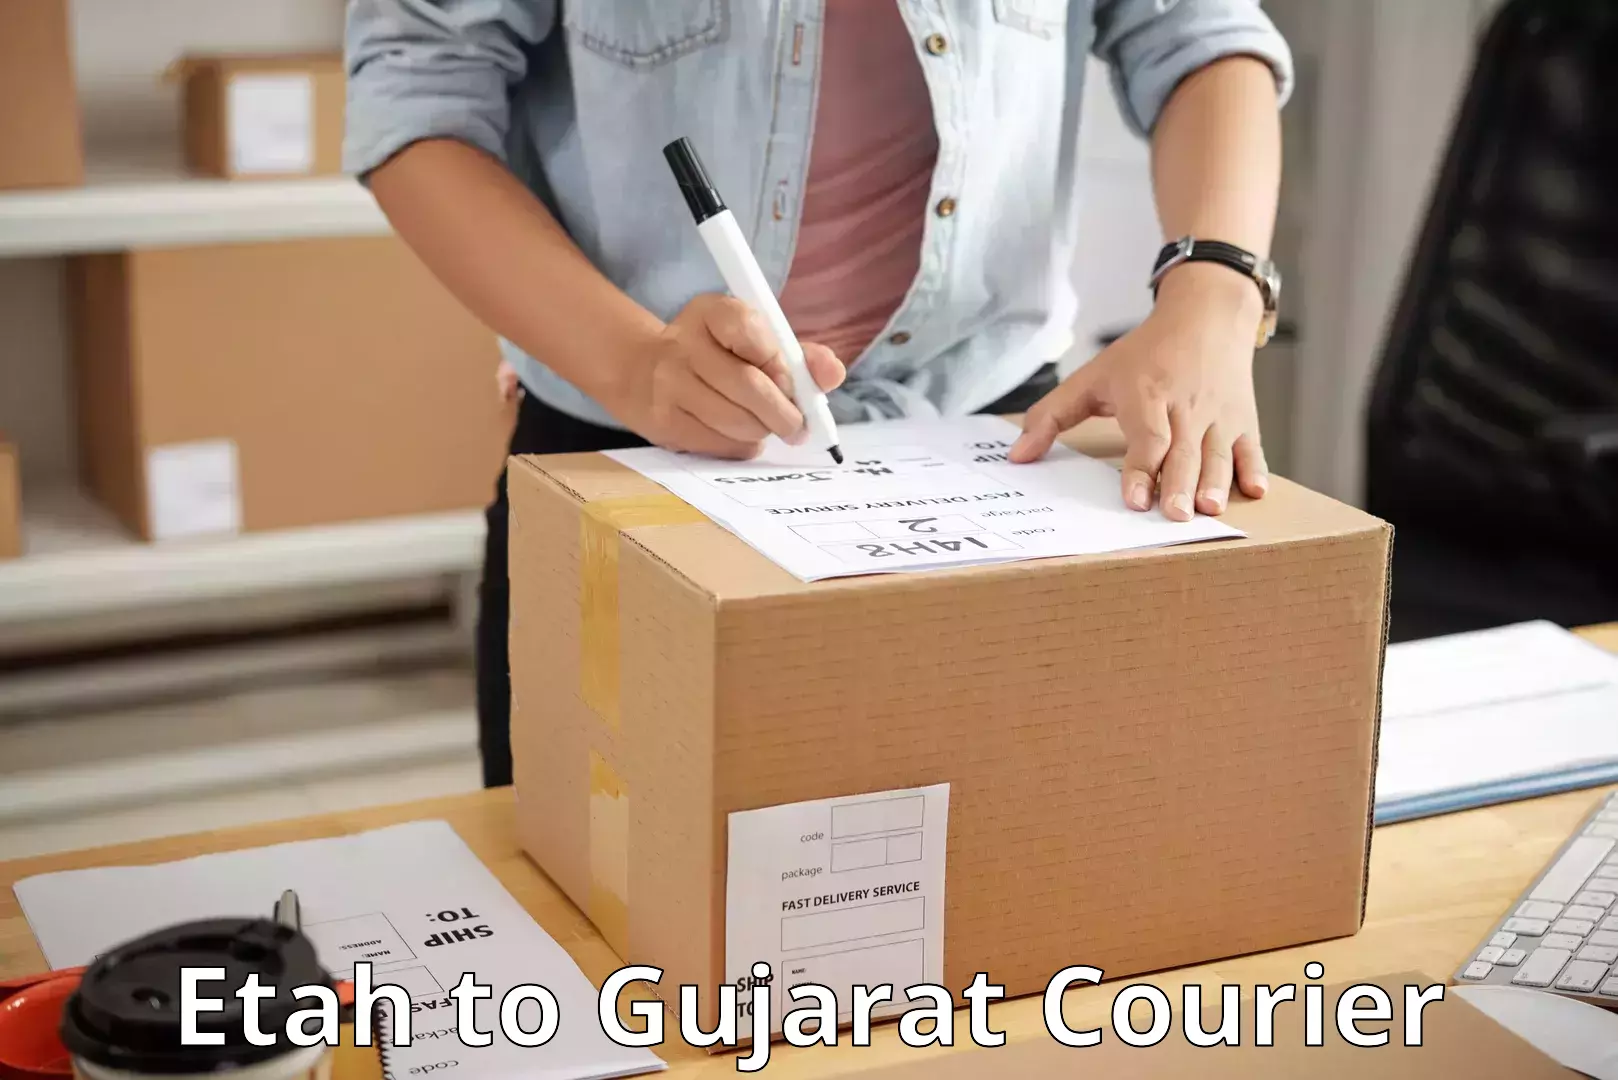 Customer-oriented courier services Etah to Gujarat